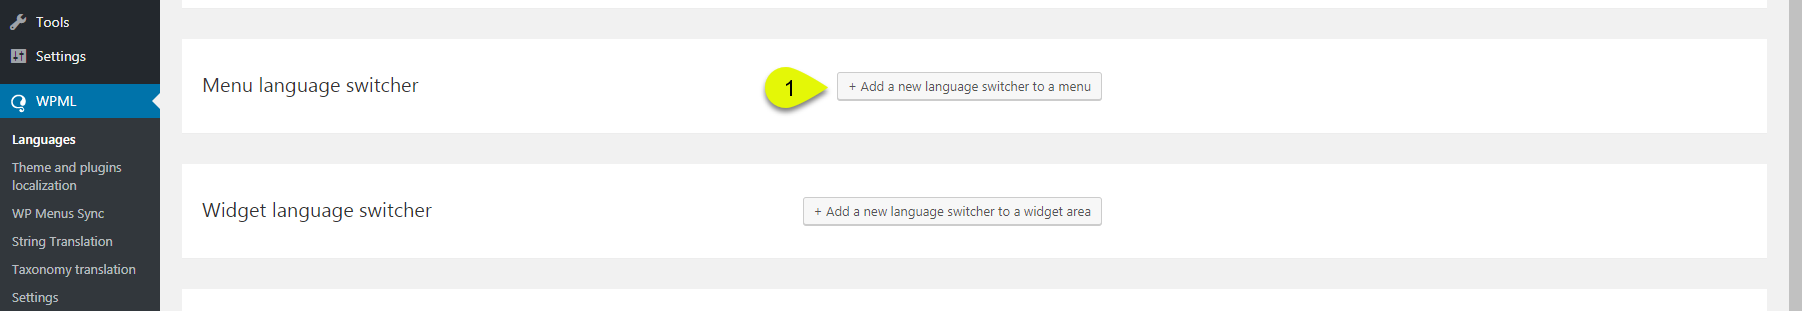 Click on the button “+Add a new language switcher to a menu